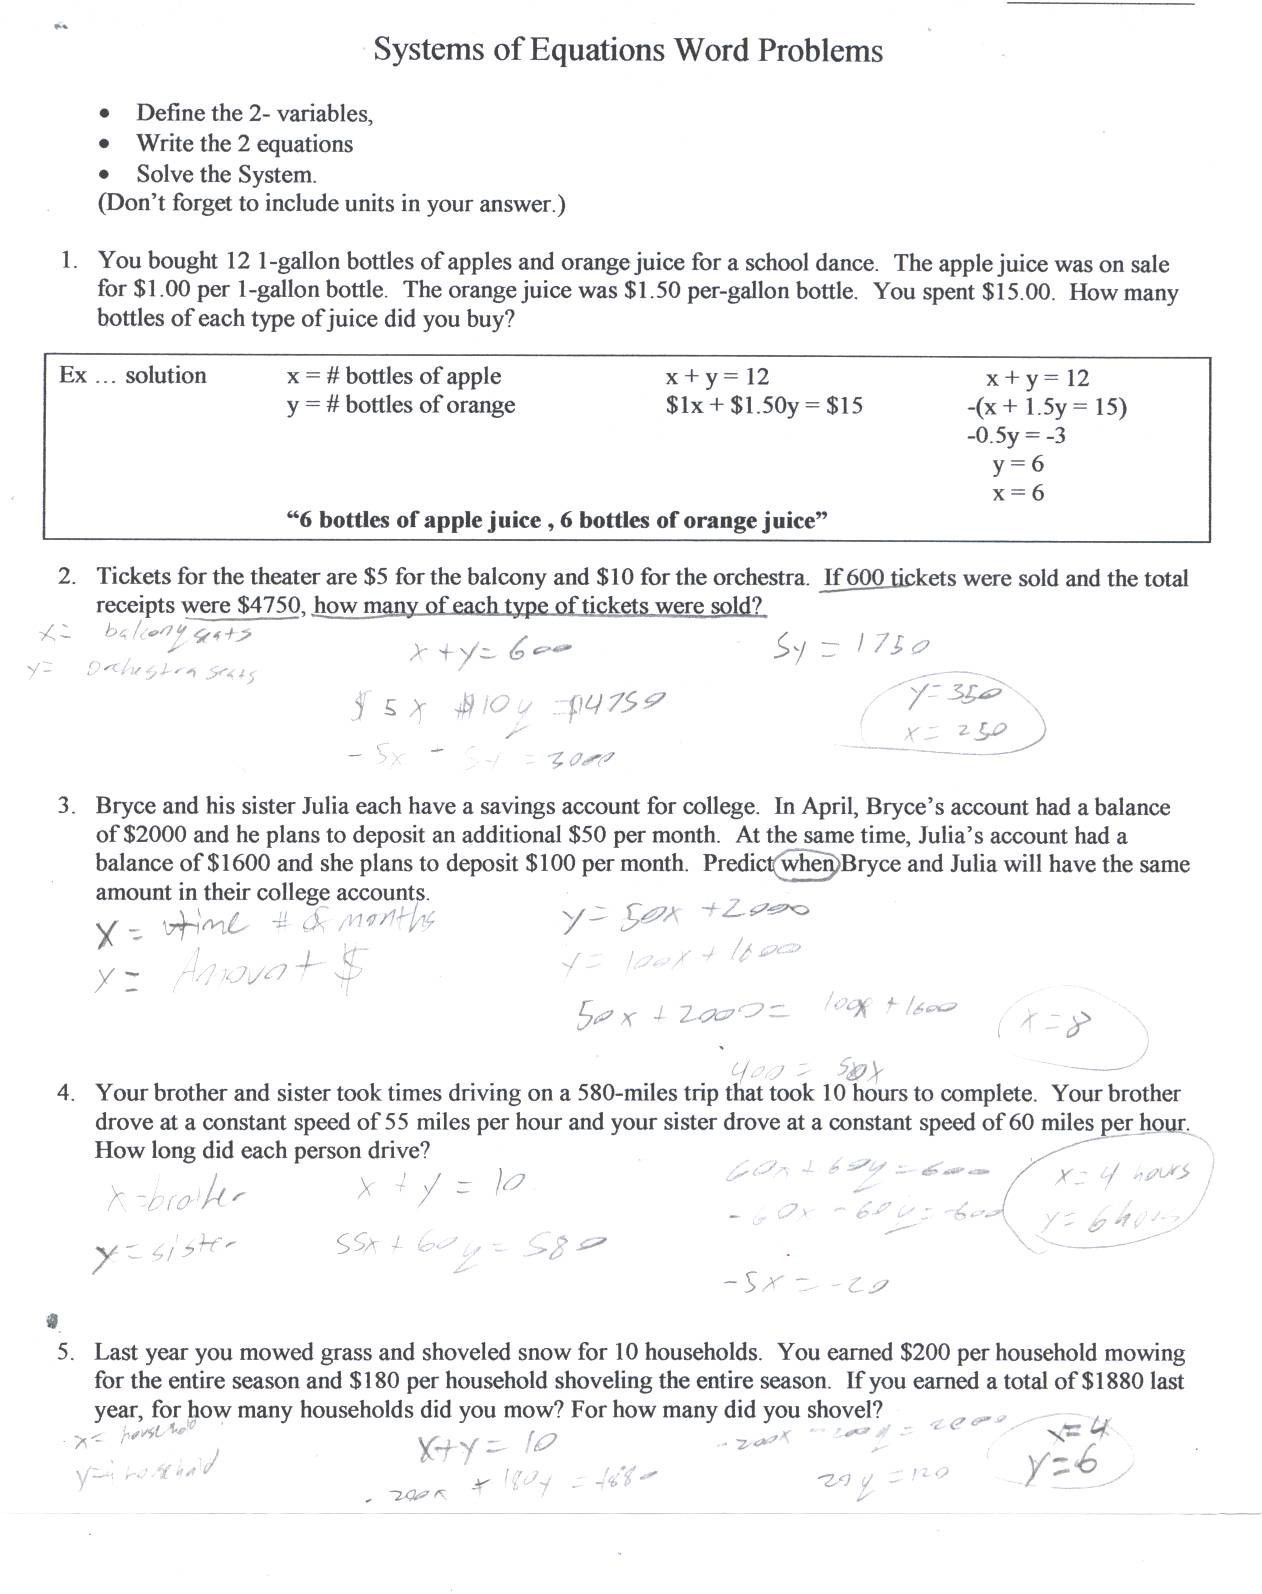 Solving Systems Of Equations Word Problems Worksheet Answer Key | db